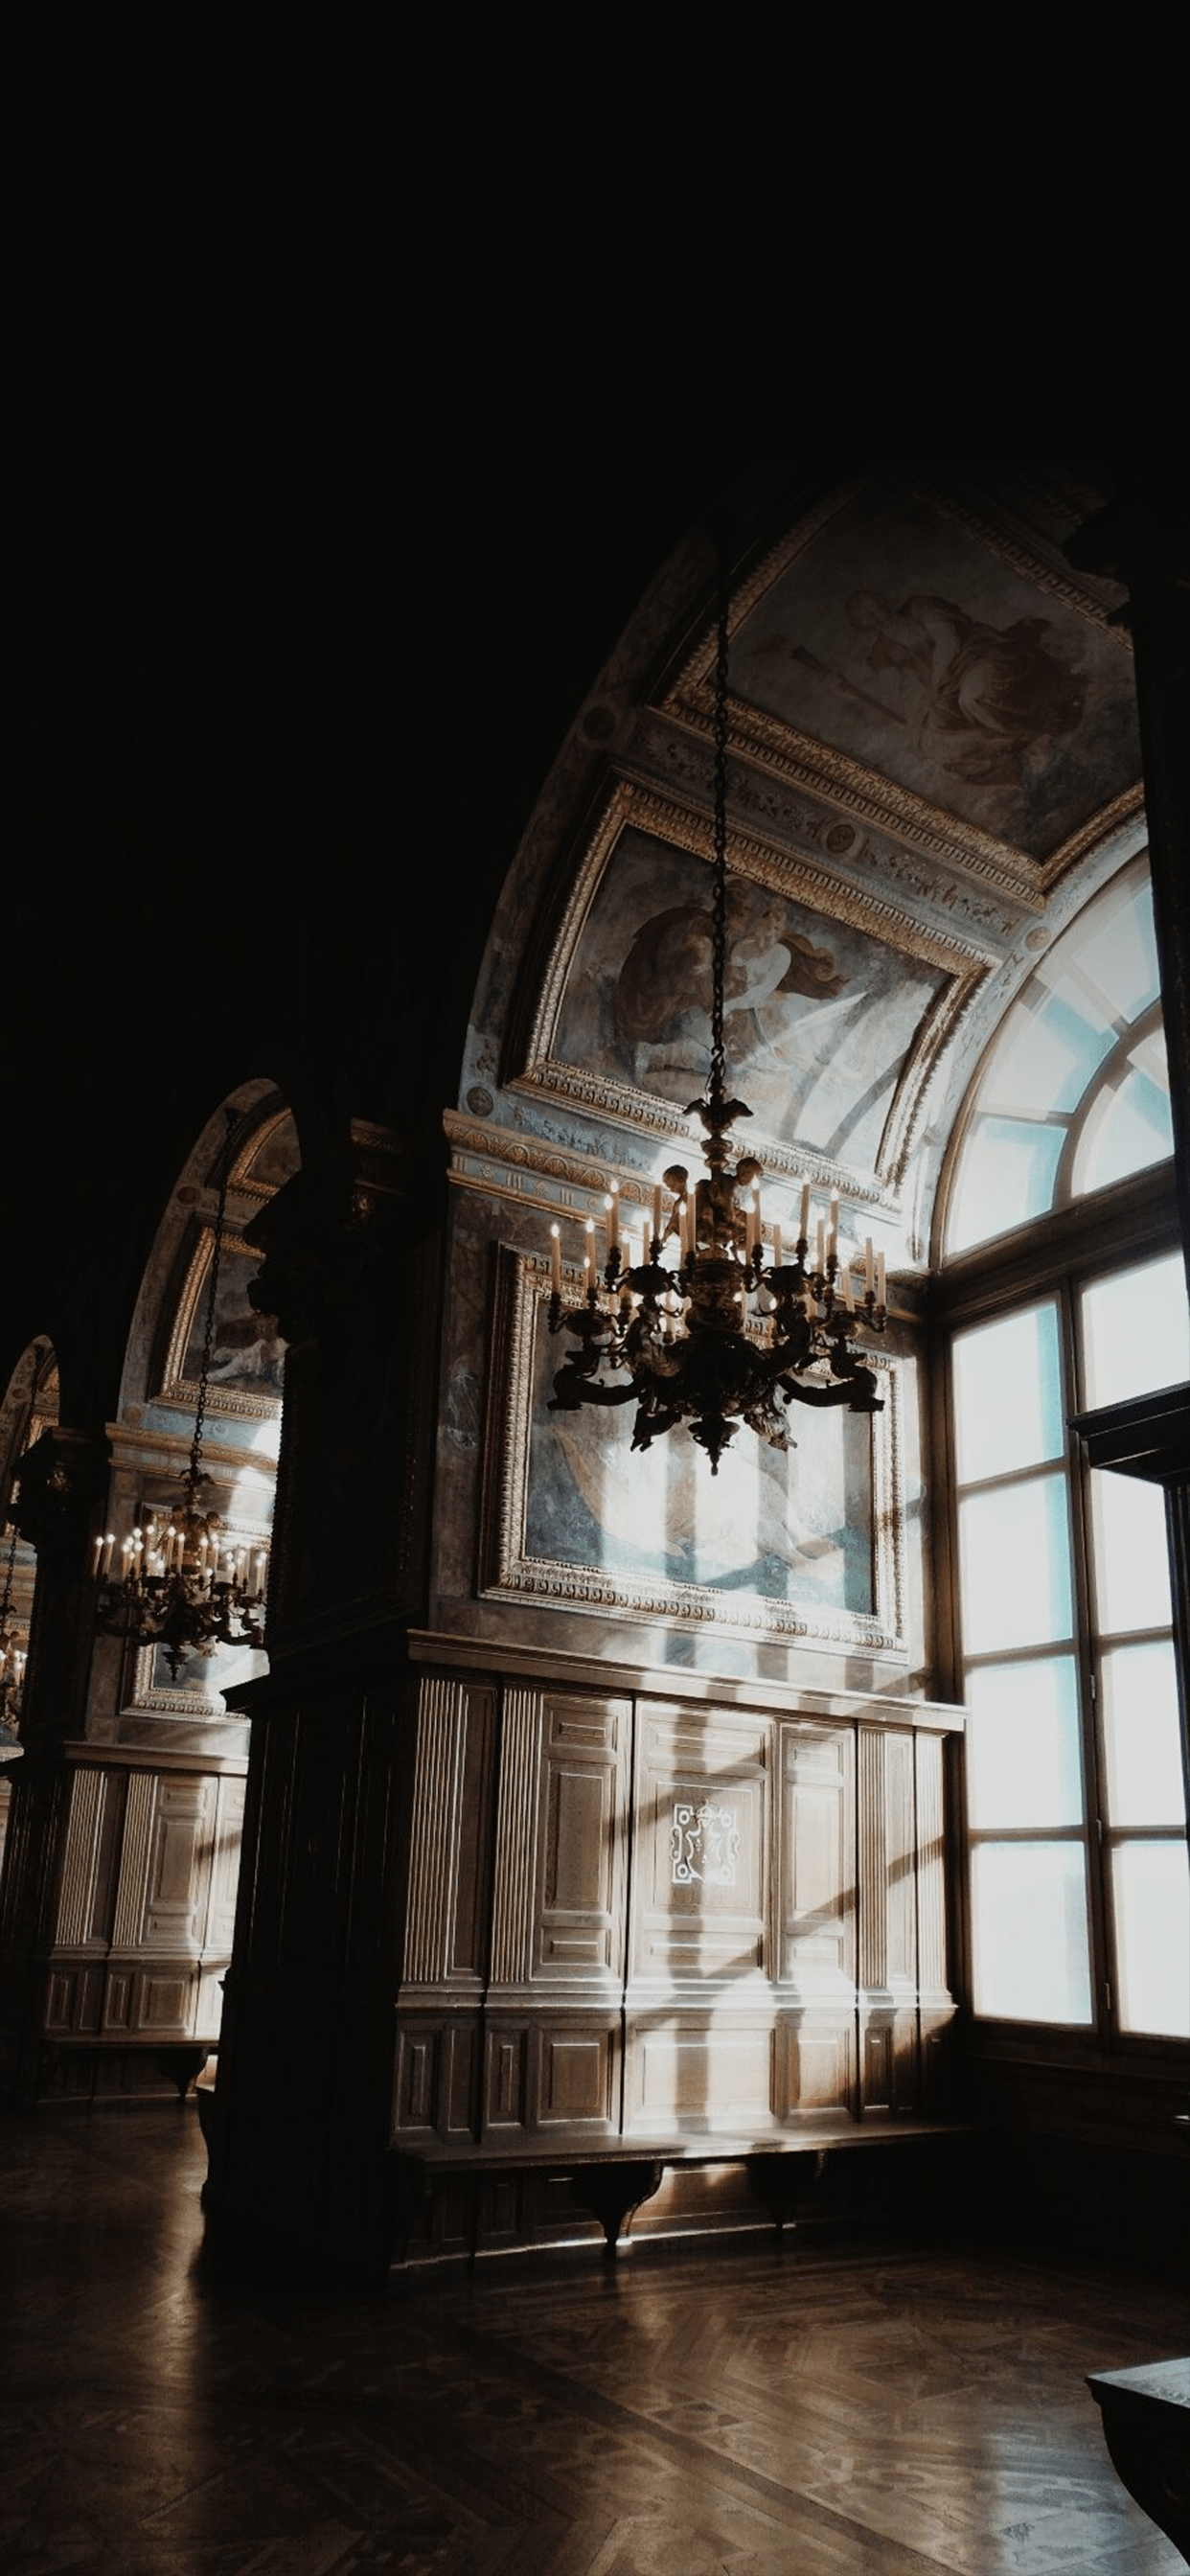 A chandelier hangs from the ceiling in a large room. - Dark academia